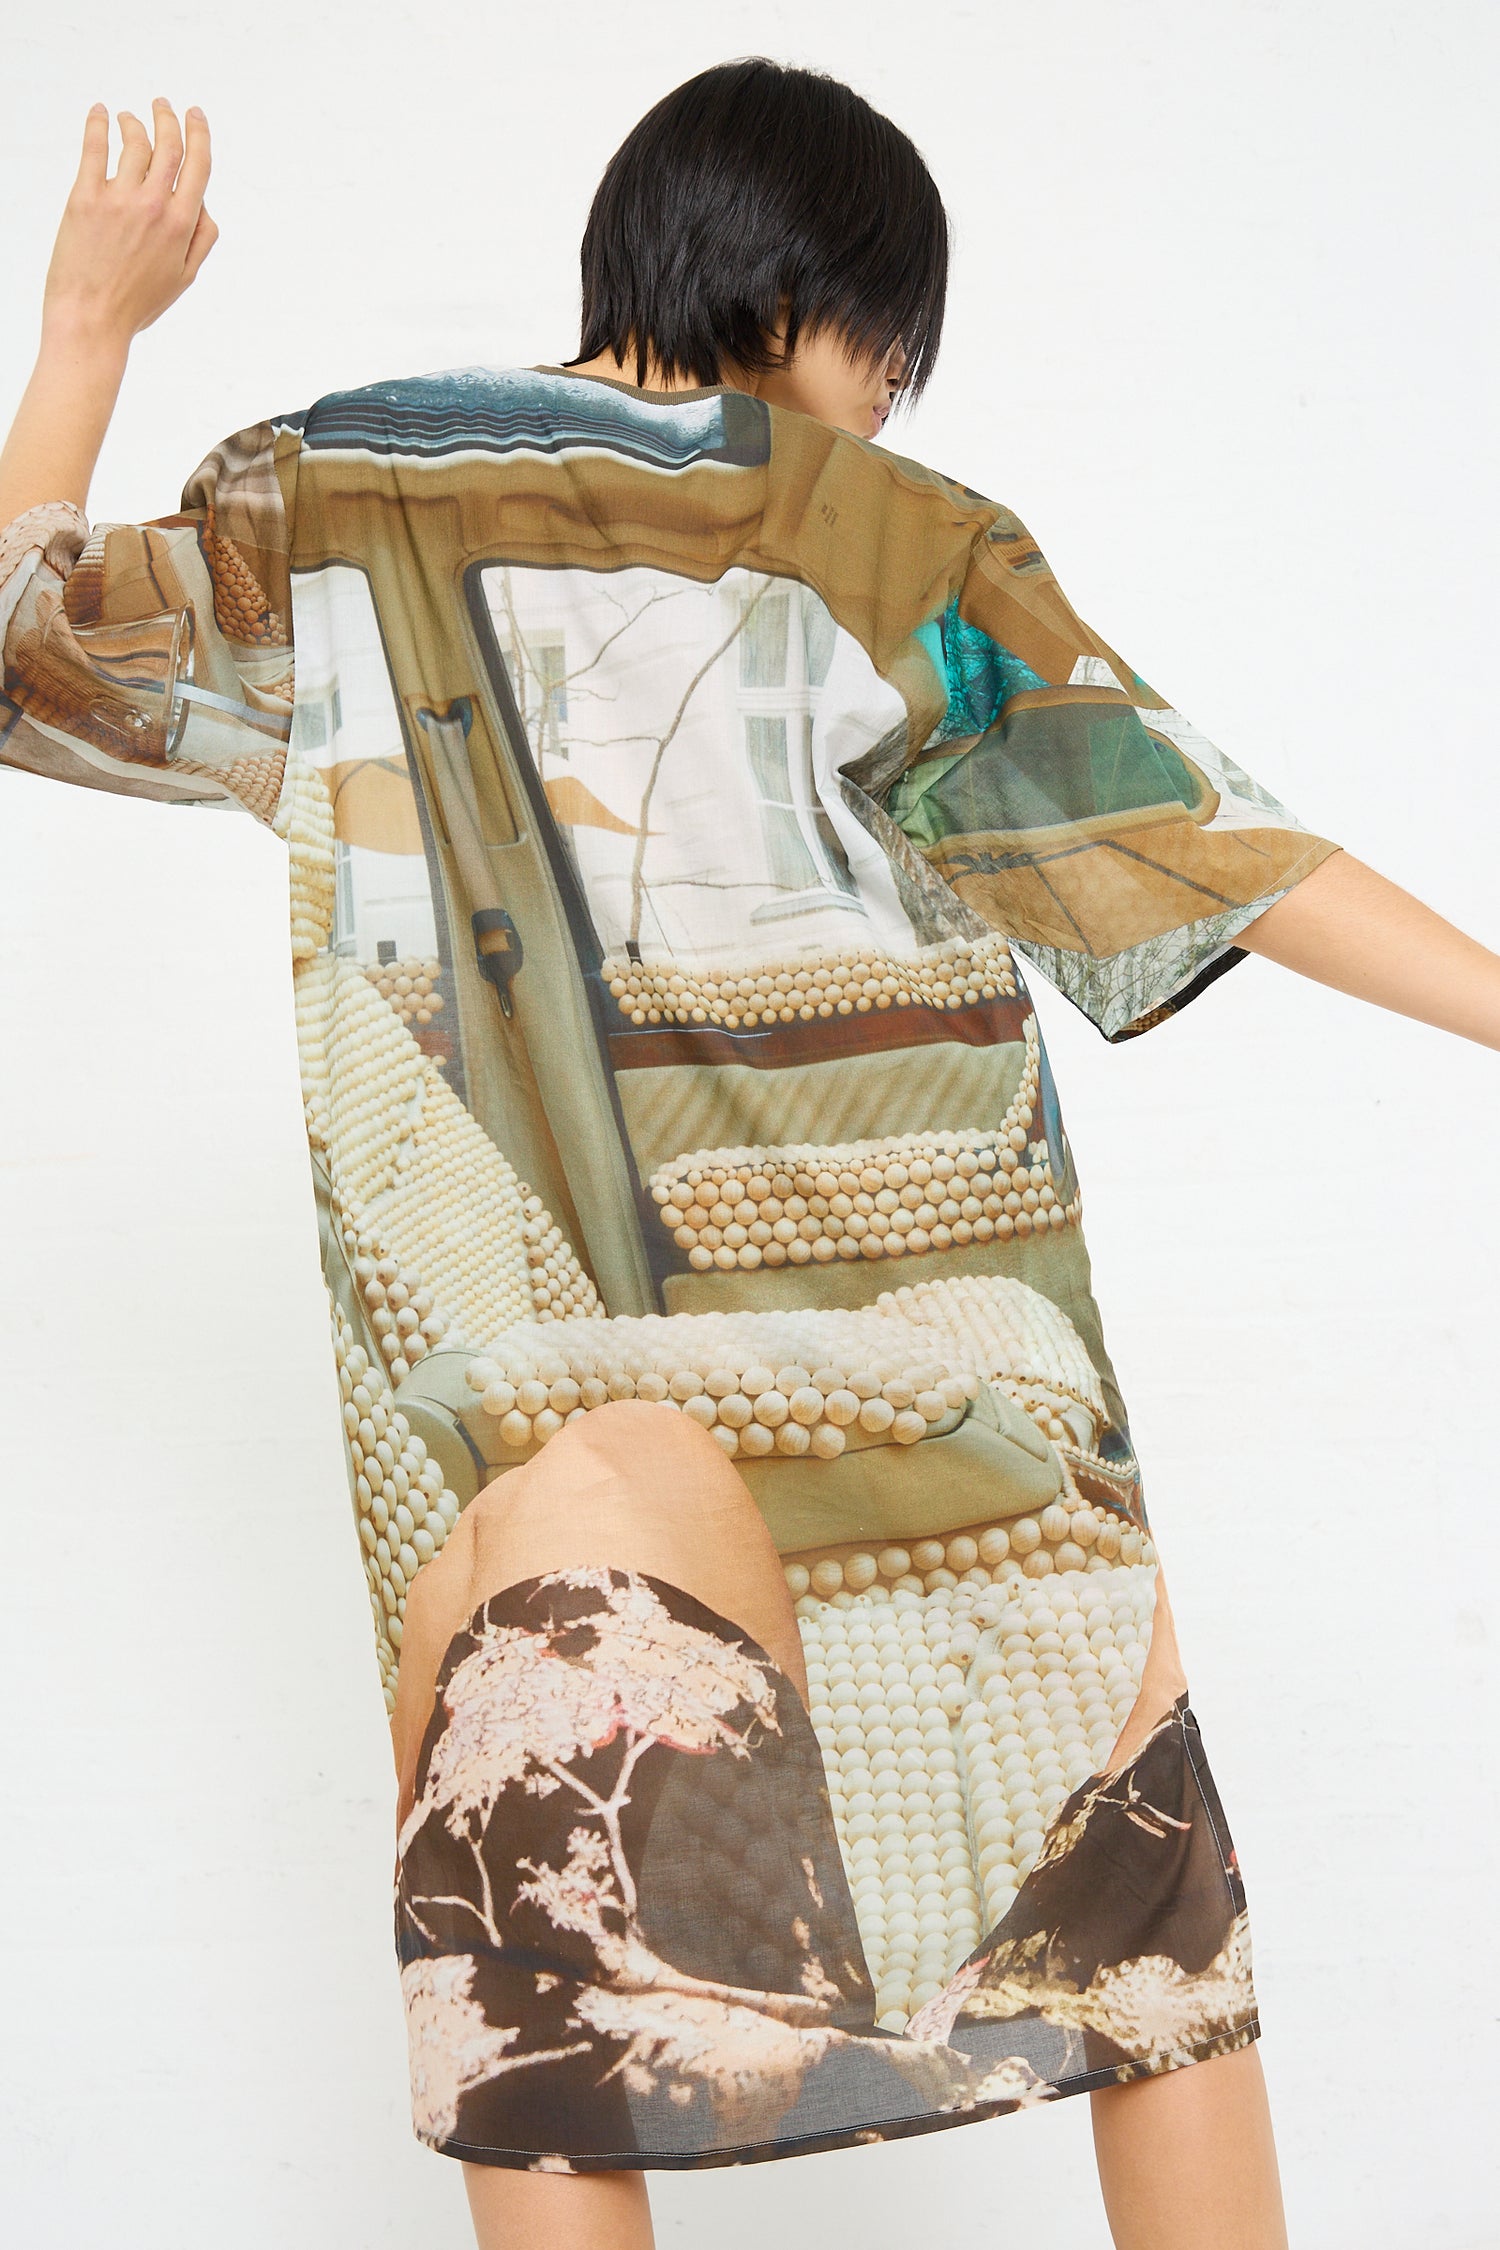 A person standing with arms raised slightly, wearing an oversized Bless No. 77 Sauna Rider Holiday Dress in Print featuring corn and landscape elements.